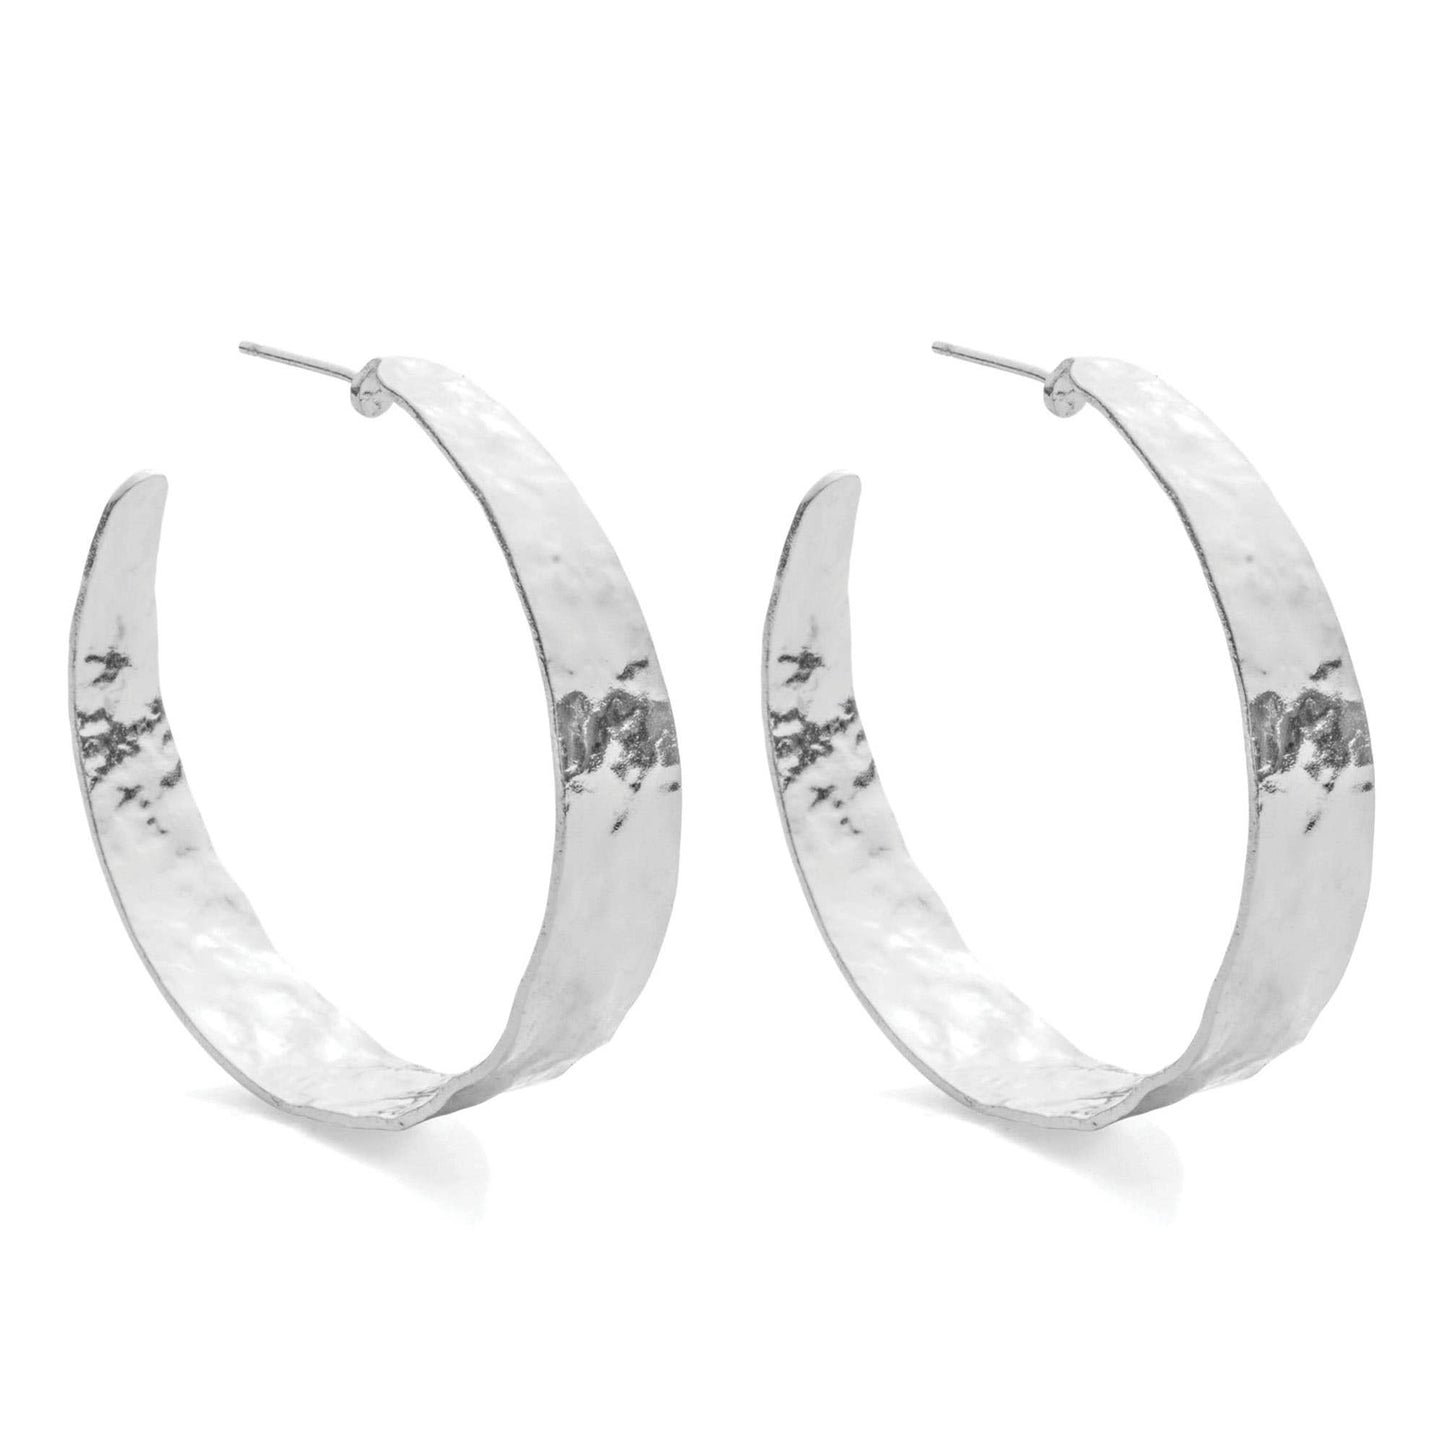 Wide Silver Gilded Hoops